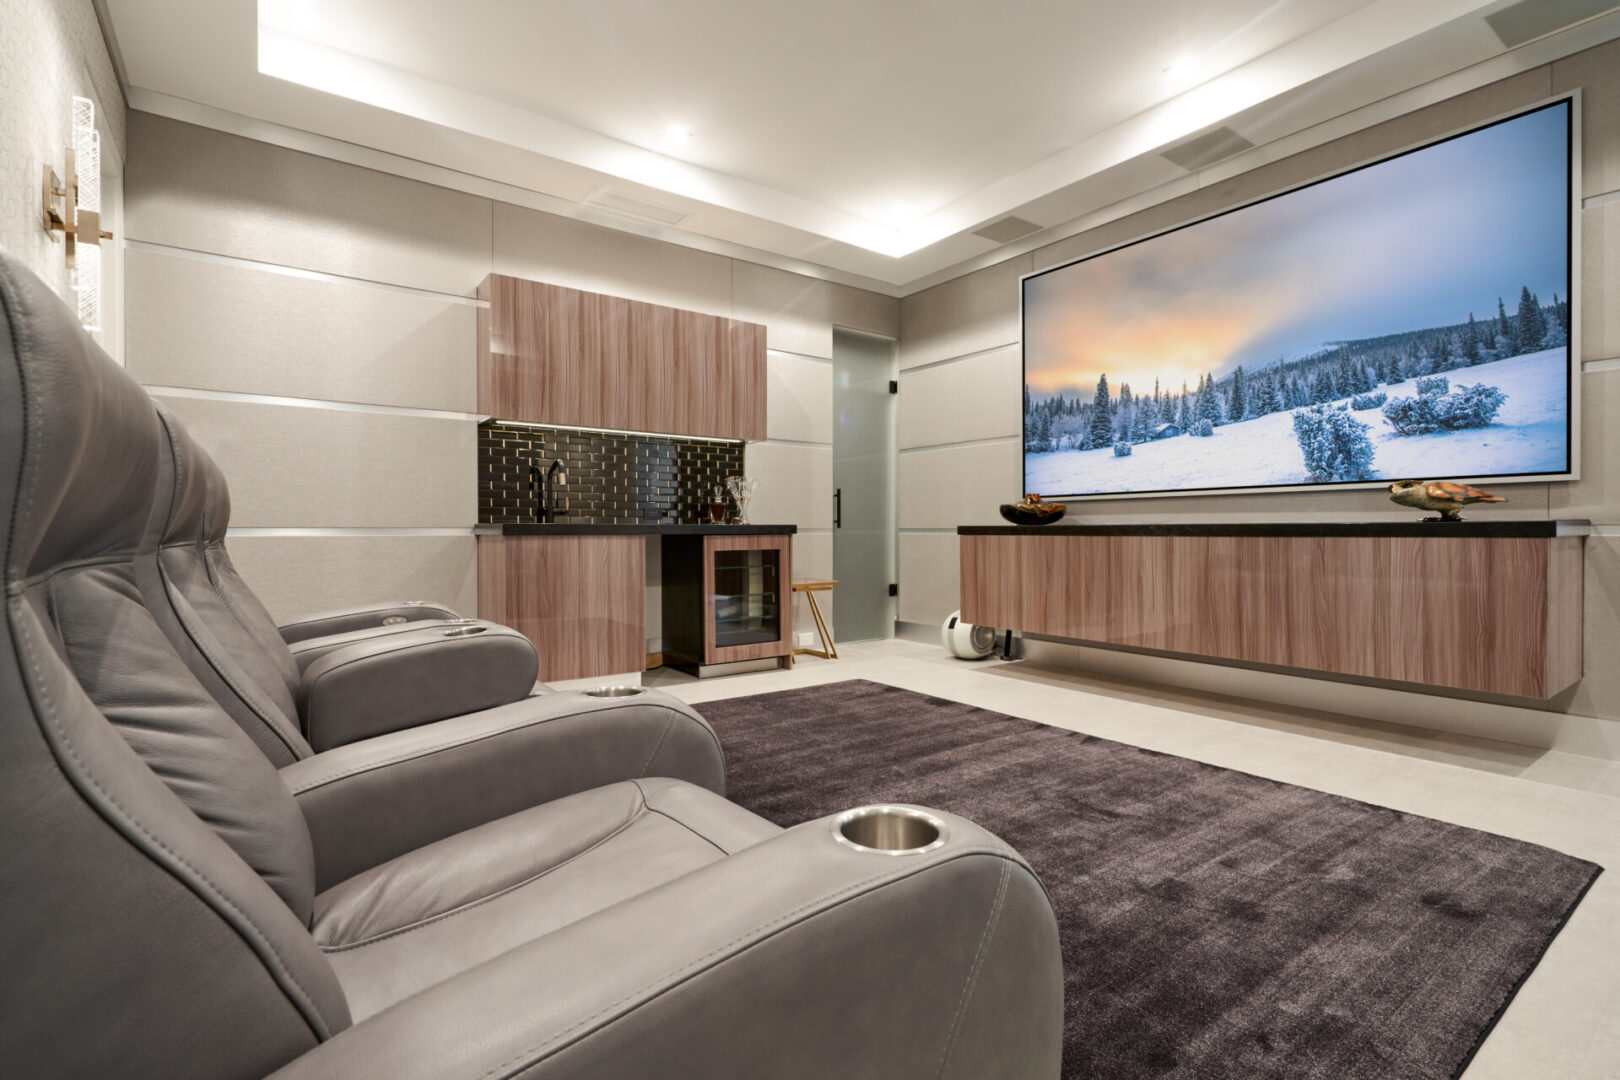 A home theater and reclining chairs with cupholders